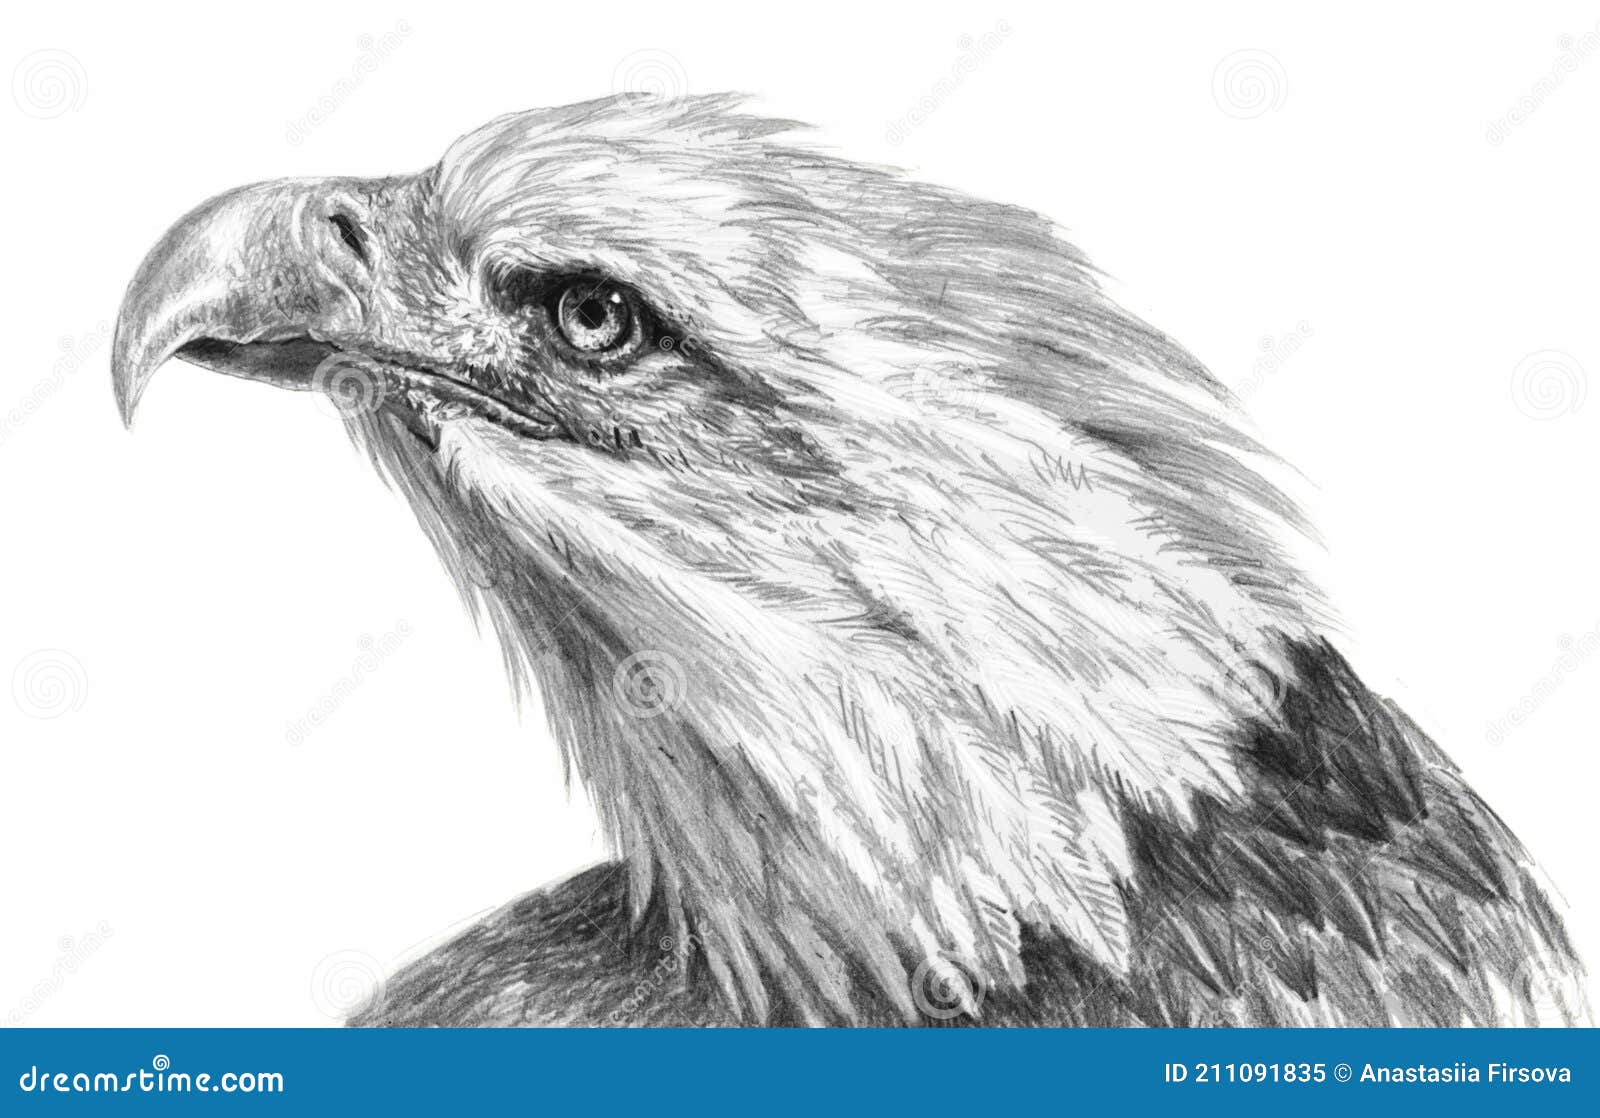 Eagle Pencil Drawing High-Res Vector Graphic - Getty Images